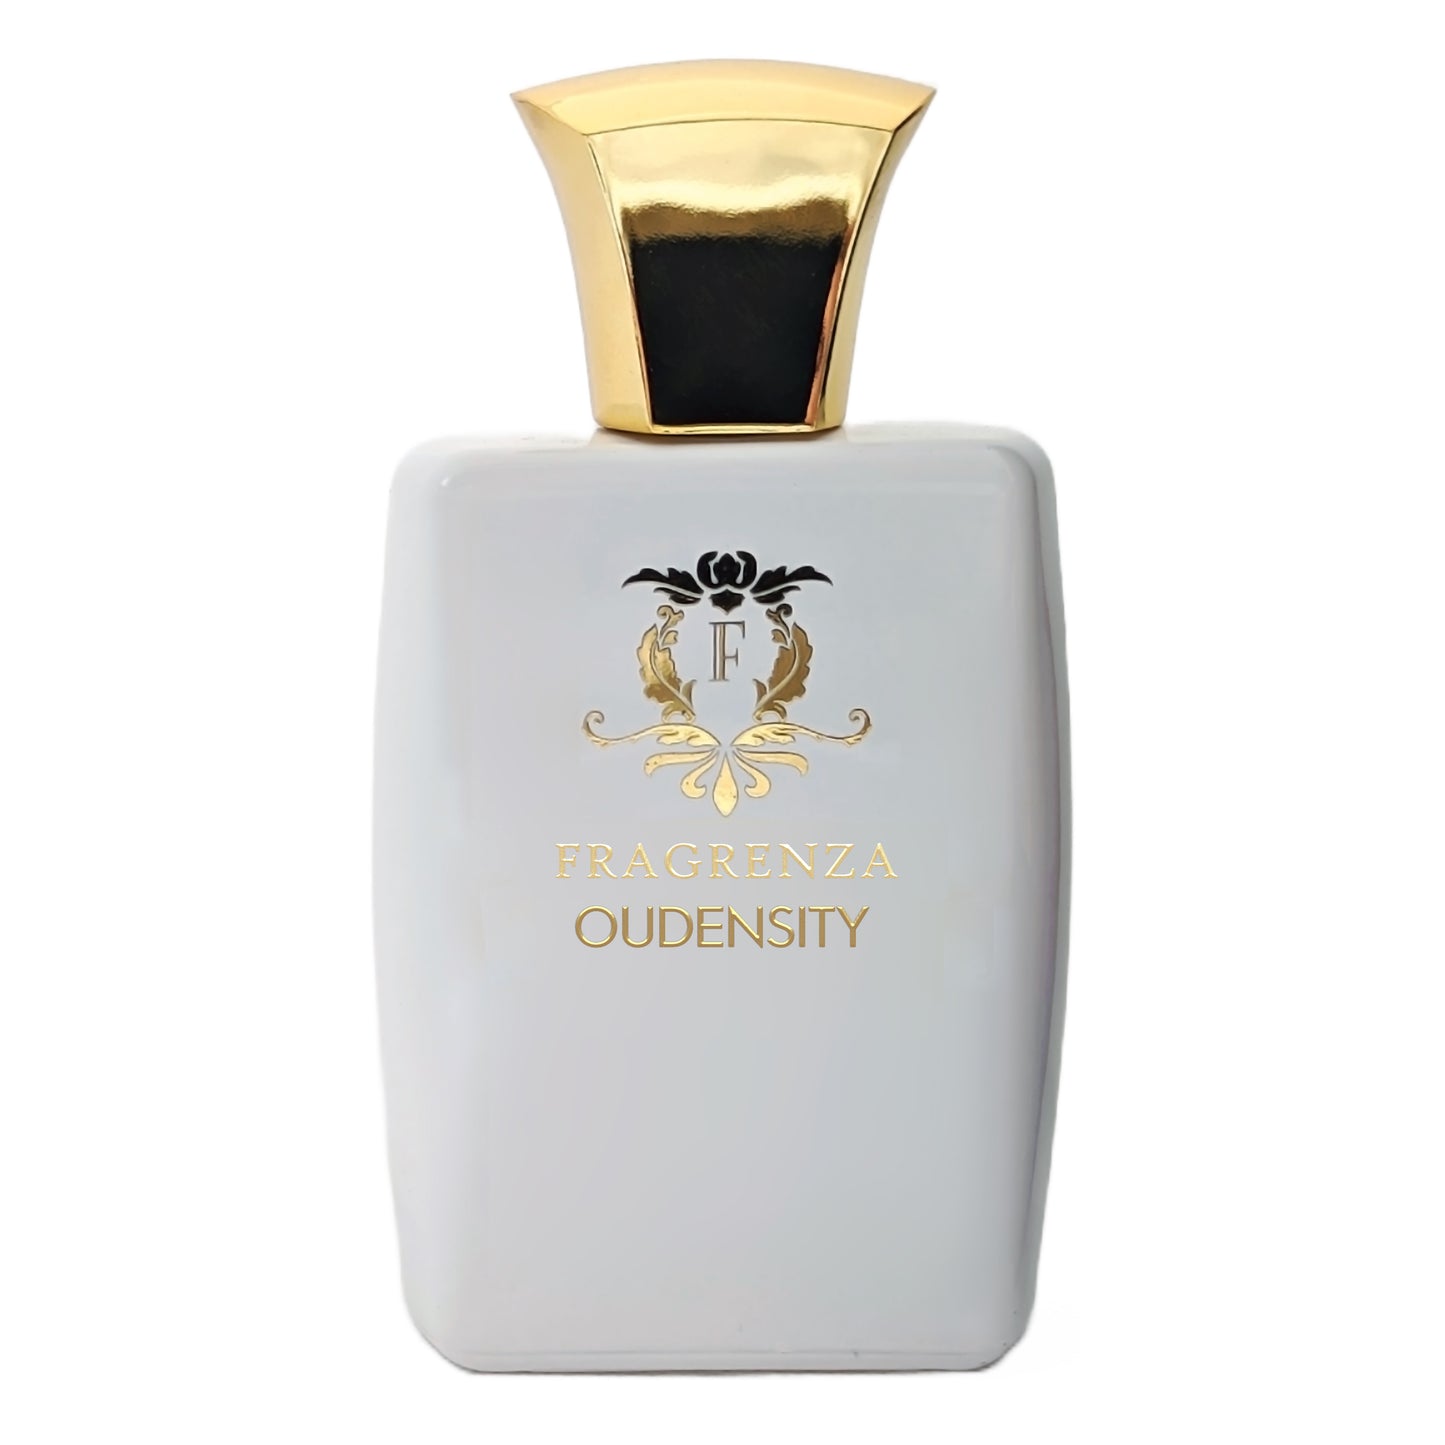 Initio Parfums Oud for Greatness dupe